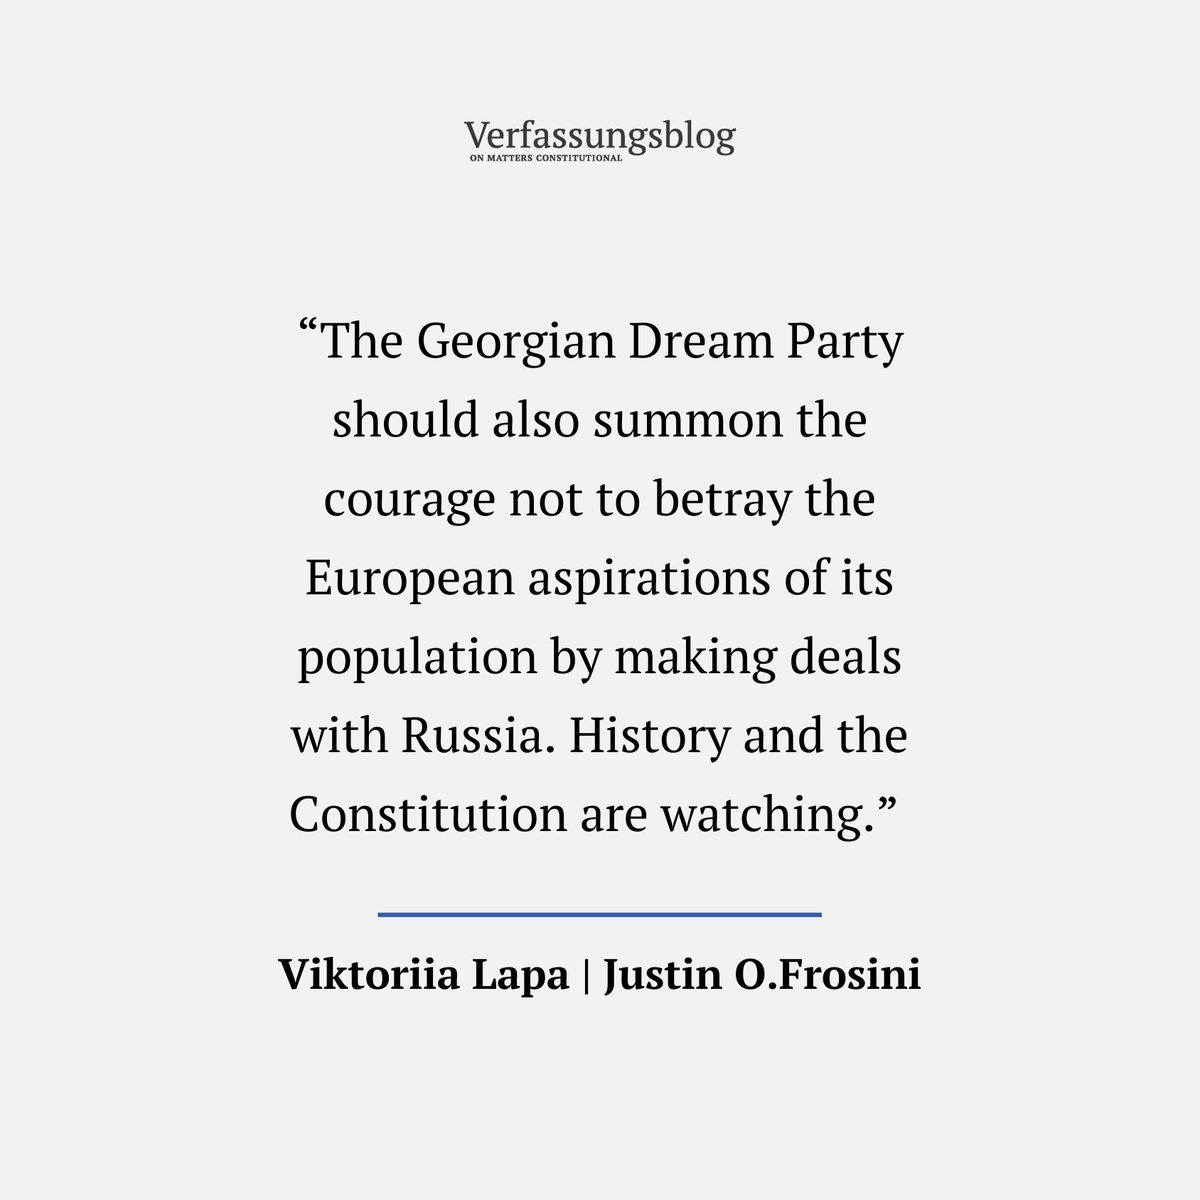 Georgia has EU candidate status since late 2023.The so-called ‘Russian Law 2.0’, is likely to be contrary to Euro-Atlantic provisions in the Georgian Constitution, implemented in 2018. @ViktoriiaLapa and Justin Frosini on the constitutional implications: verfassungsblog.de/challenges-to-…